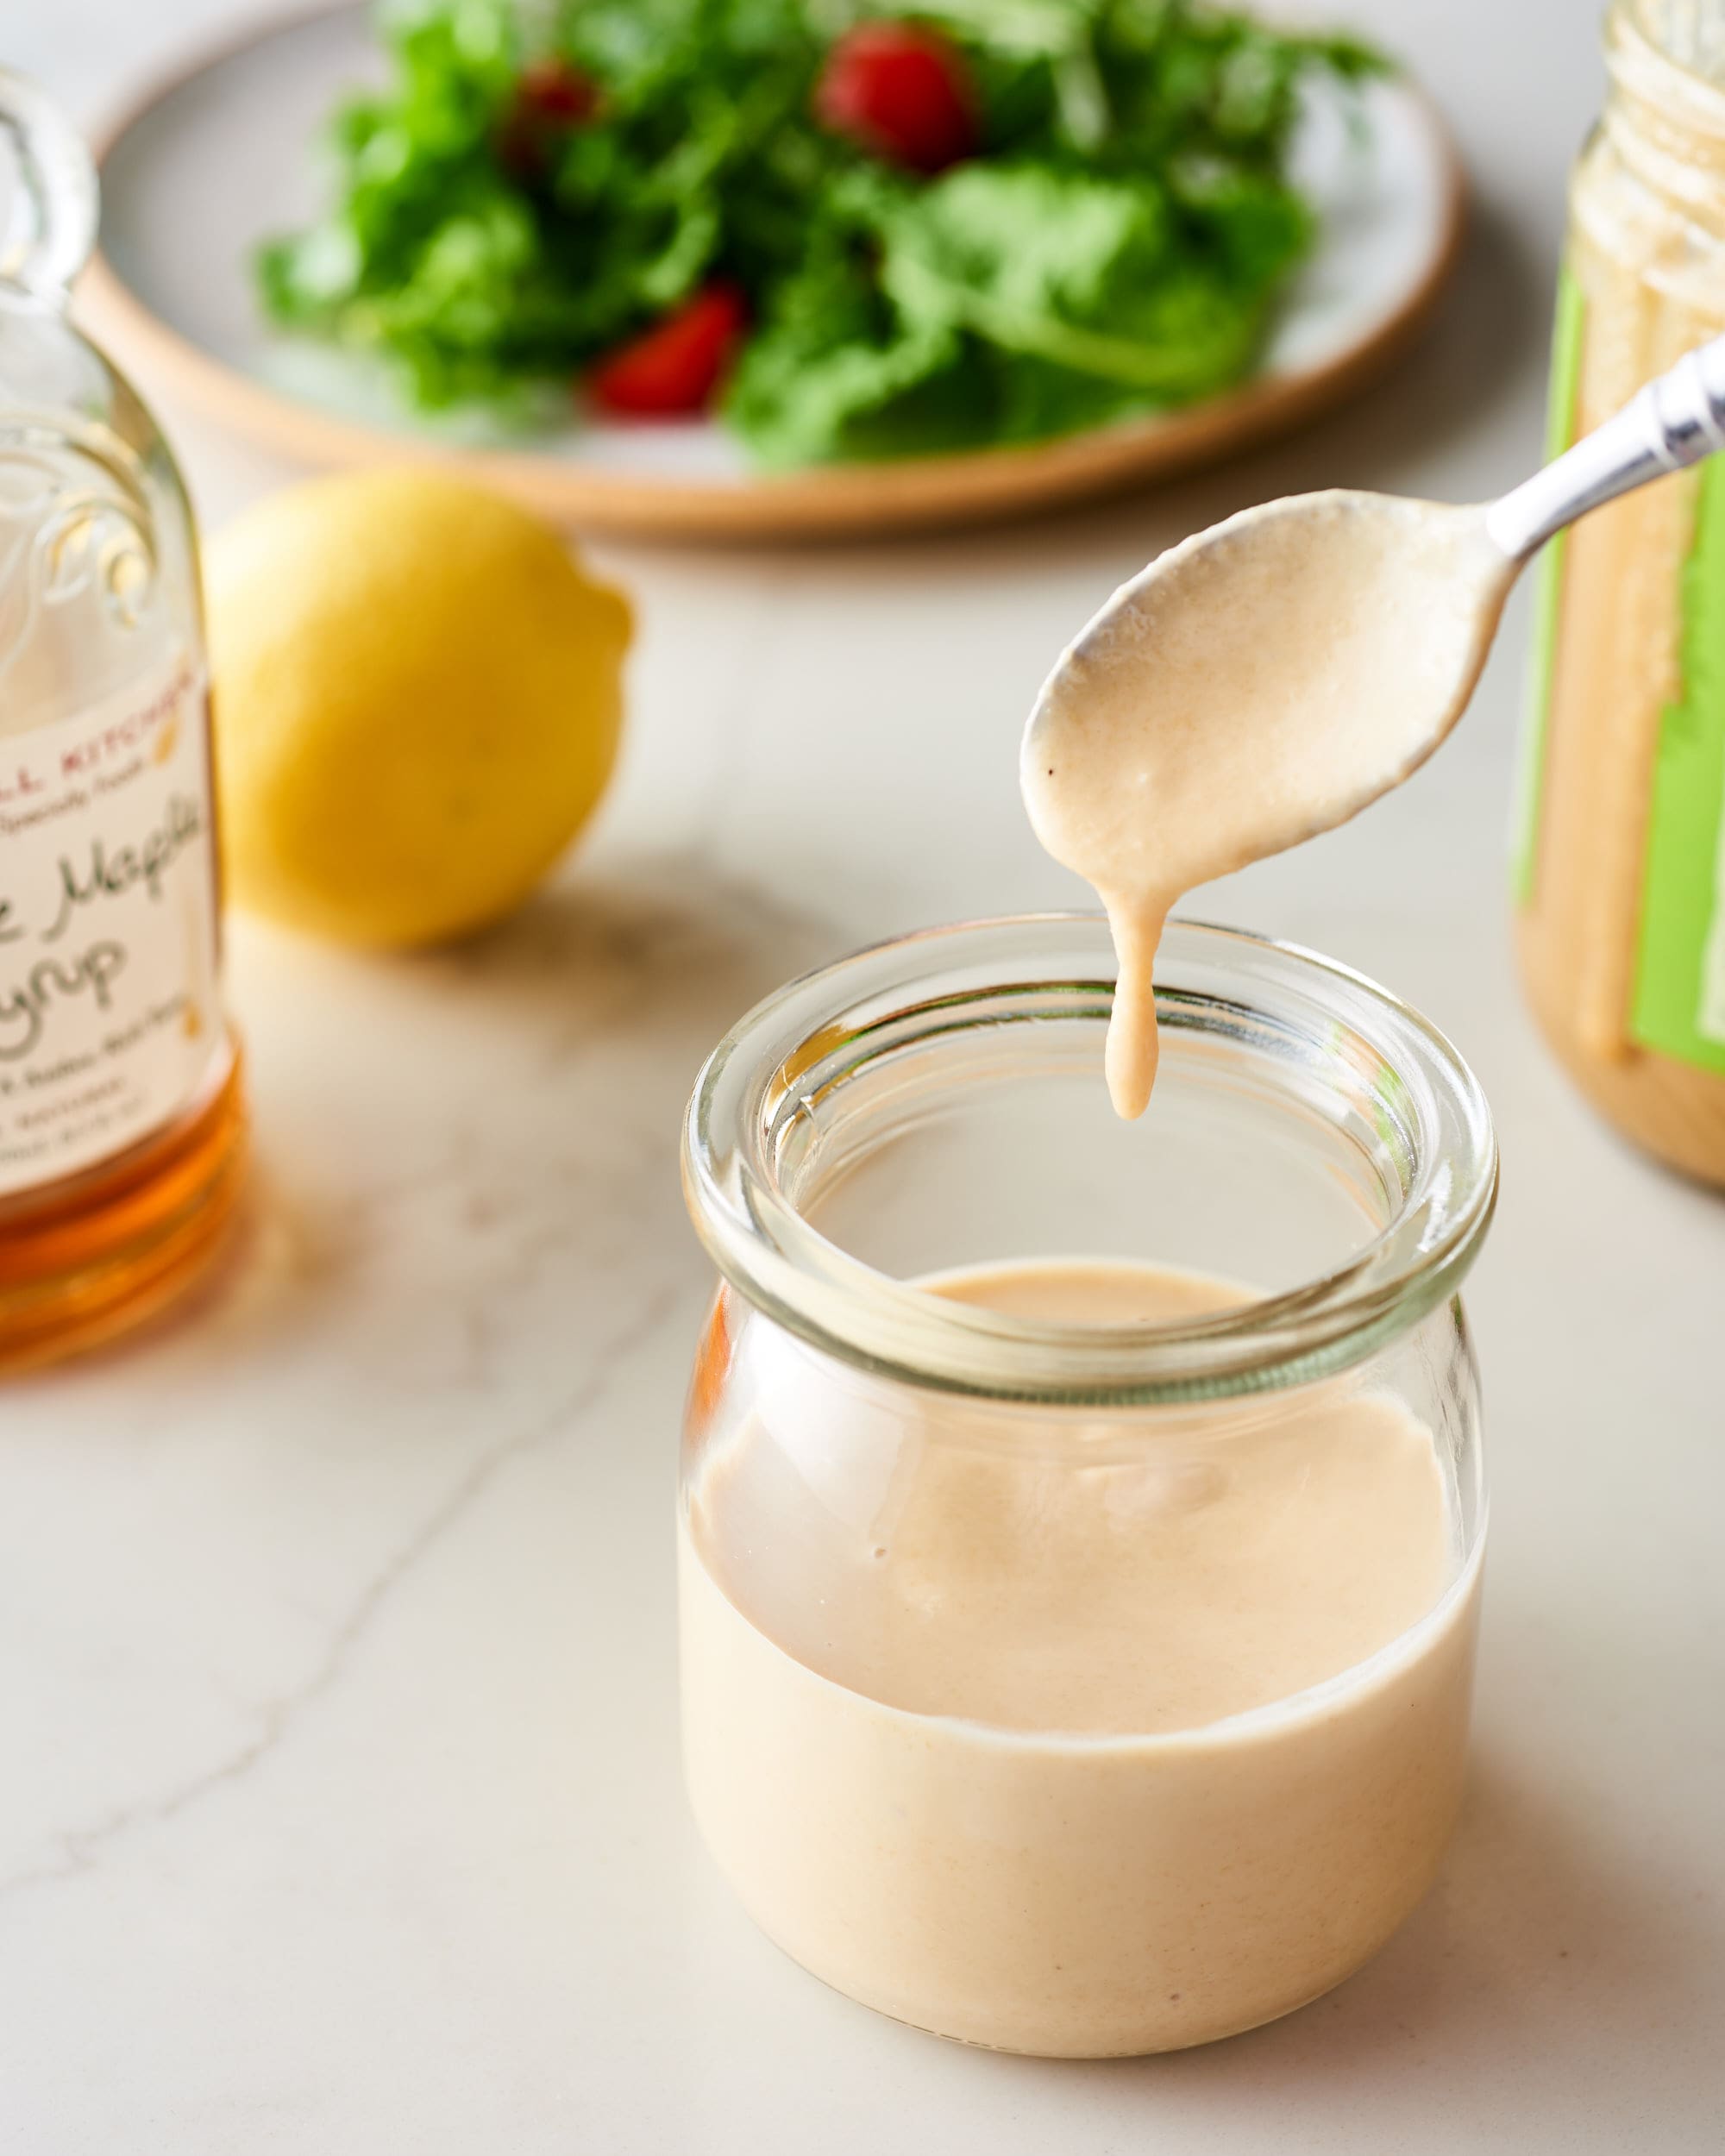 Review: Minimalist Baker's 3-Ingredient Tahini Dressing Is Nearly